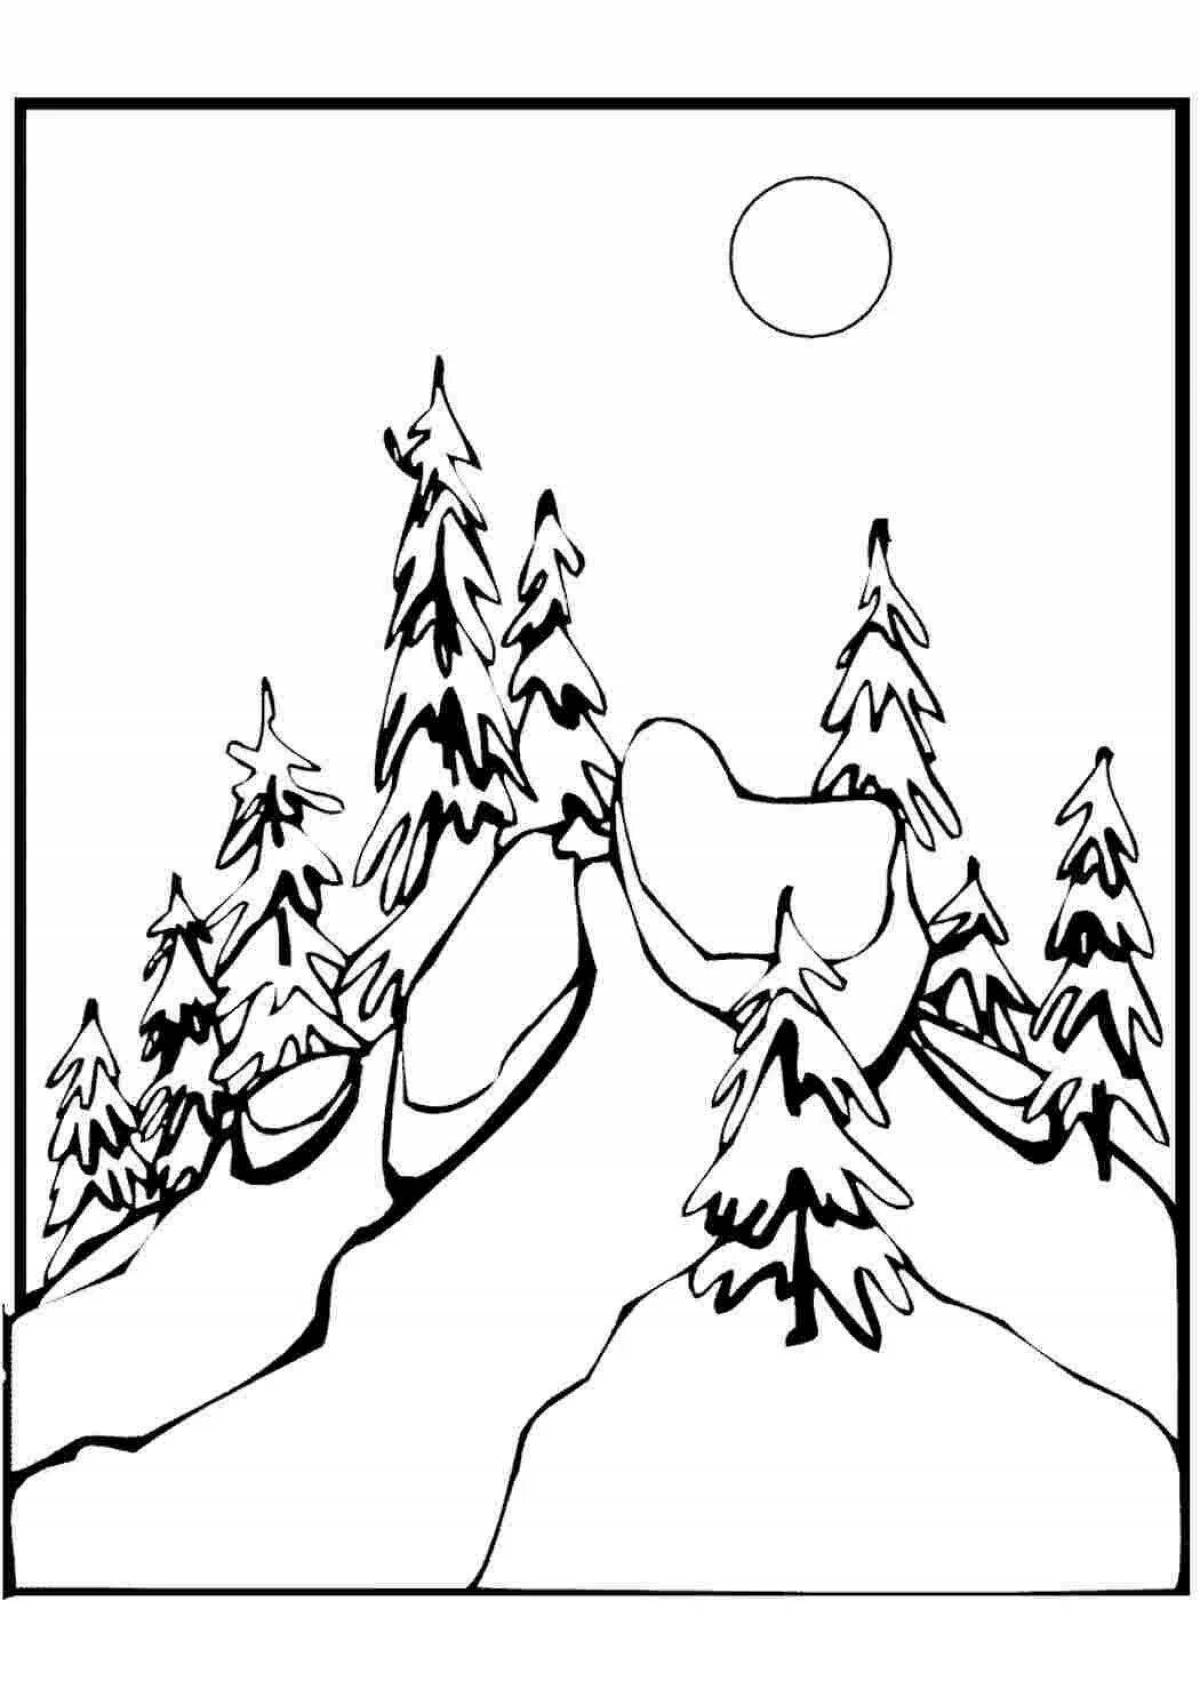 Large winter forest drawing